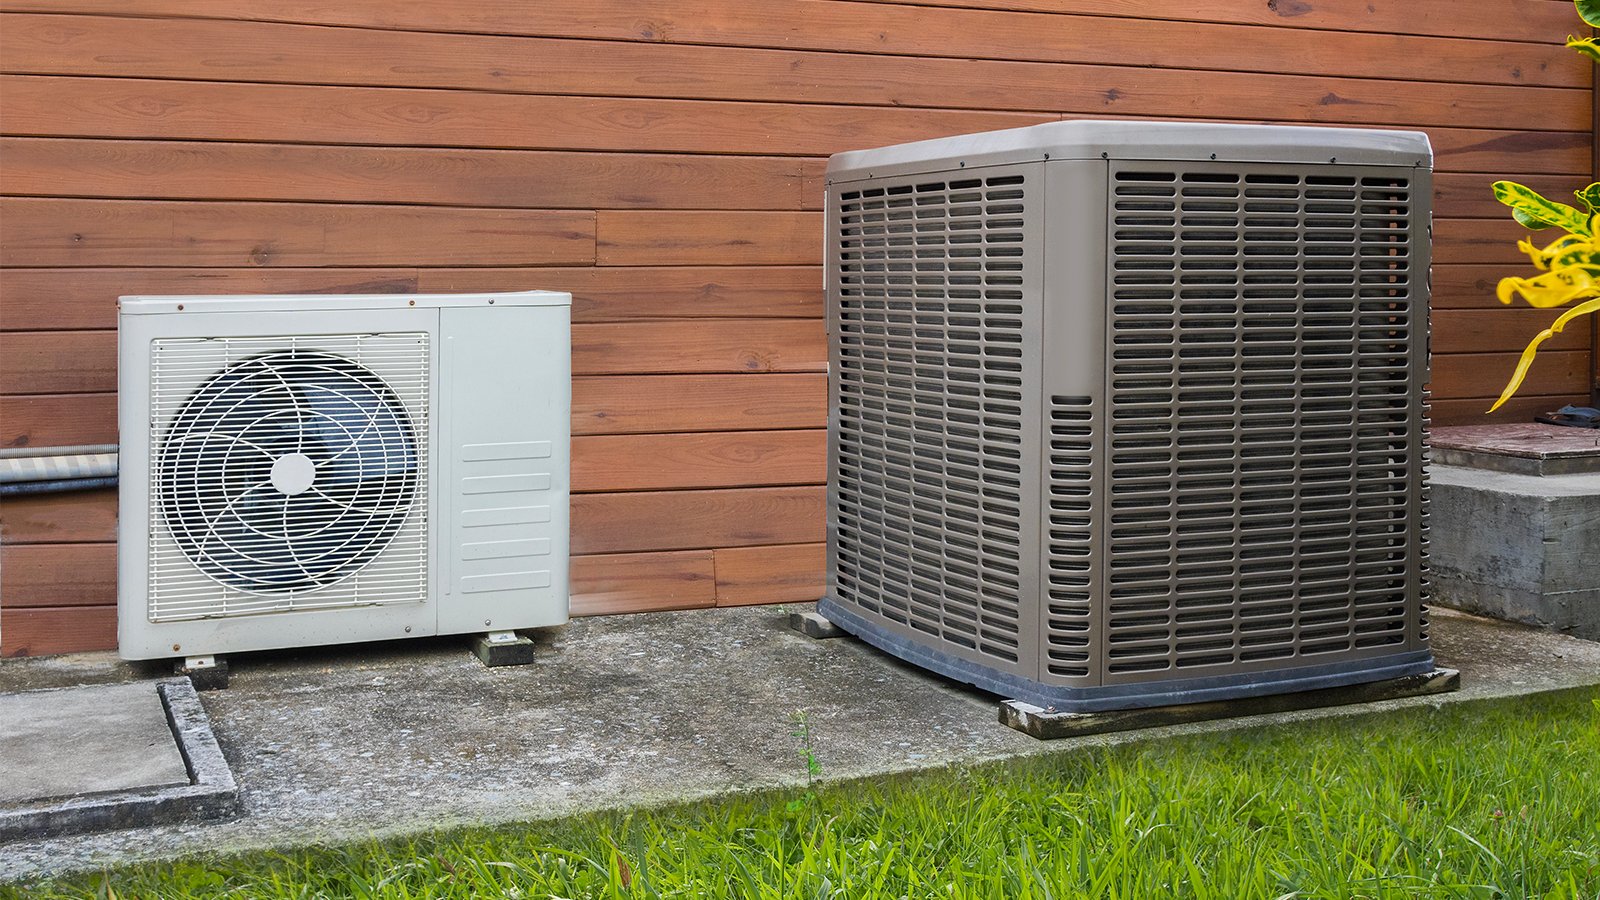 Why You Should Keep Shrubs and Obstructions Away from Your A/C Unit